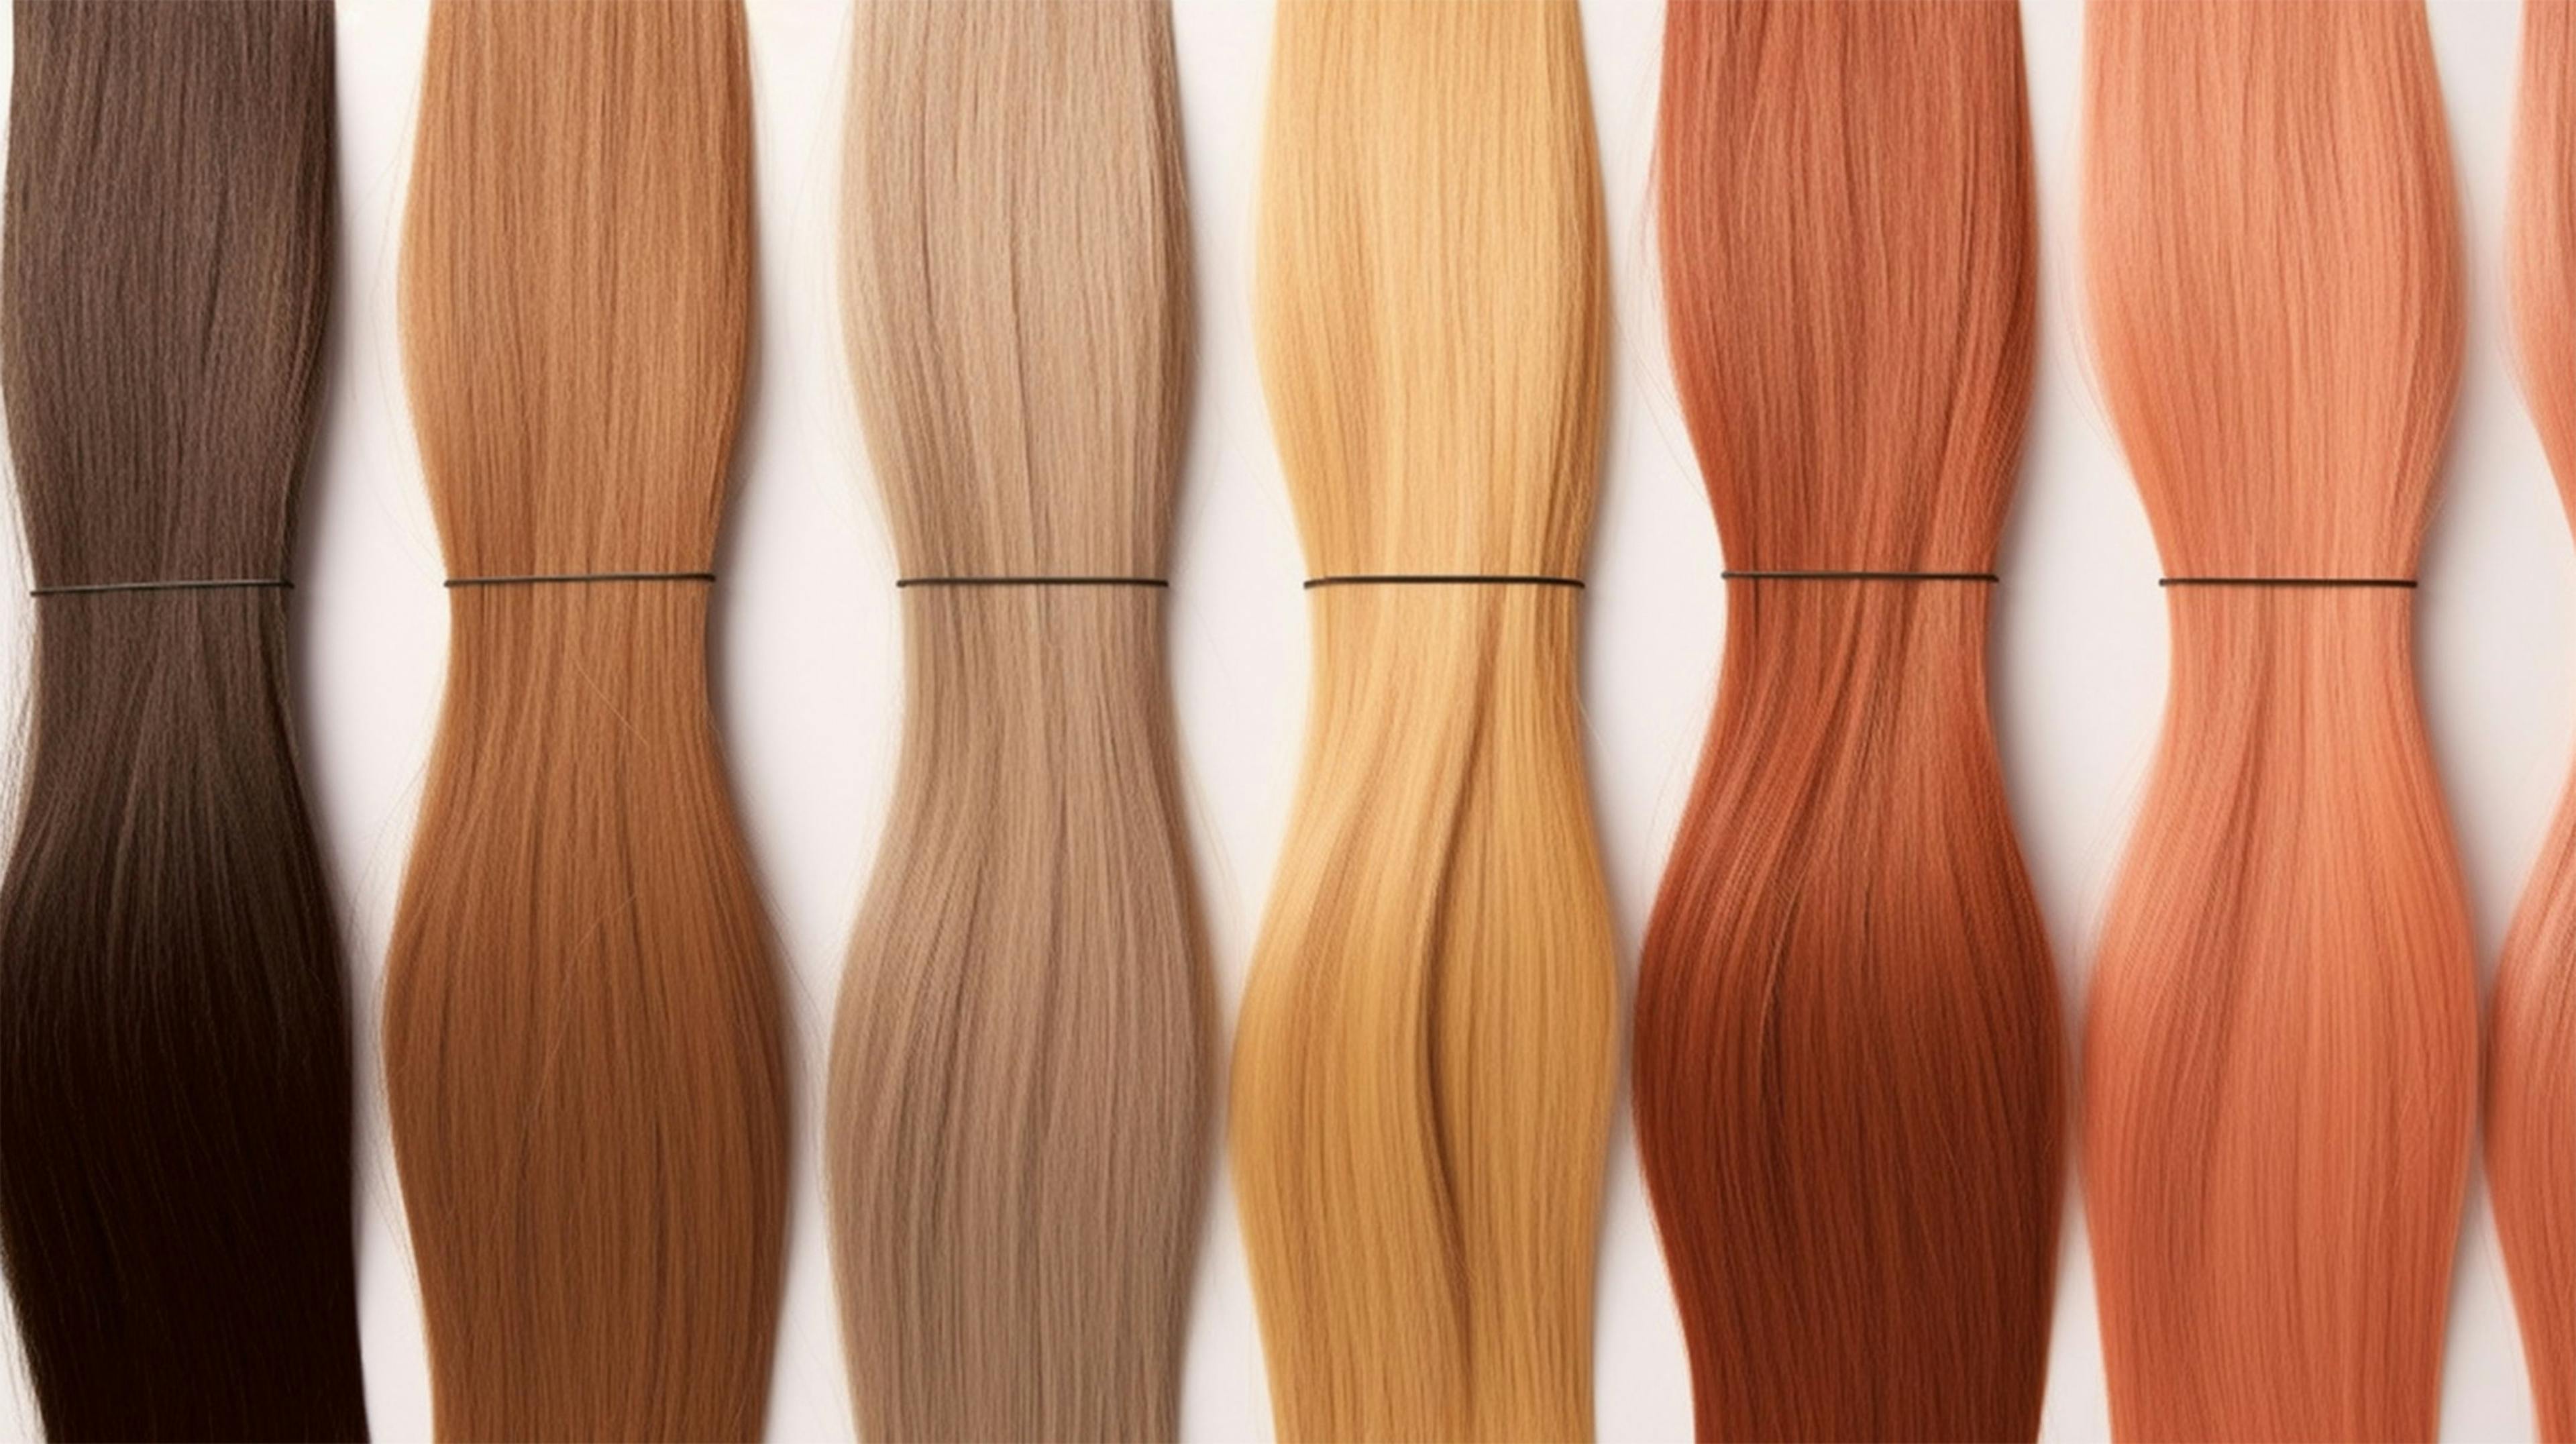 Samples of Different Hair Colors | image credit: Margo_Alexa - stock.adobe.com